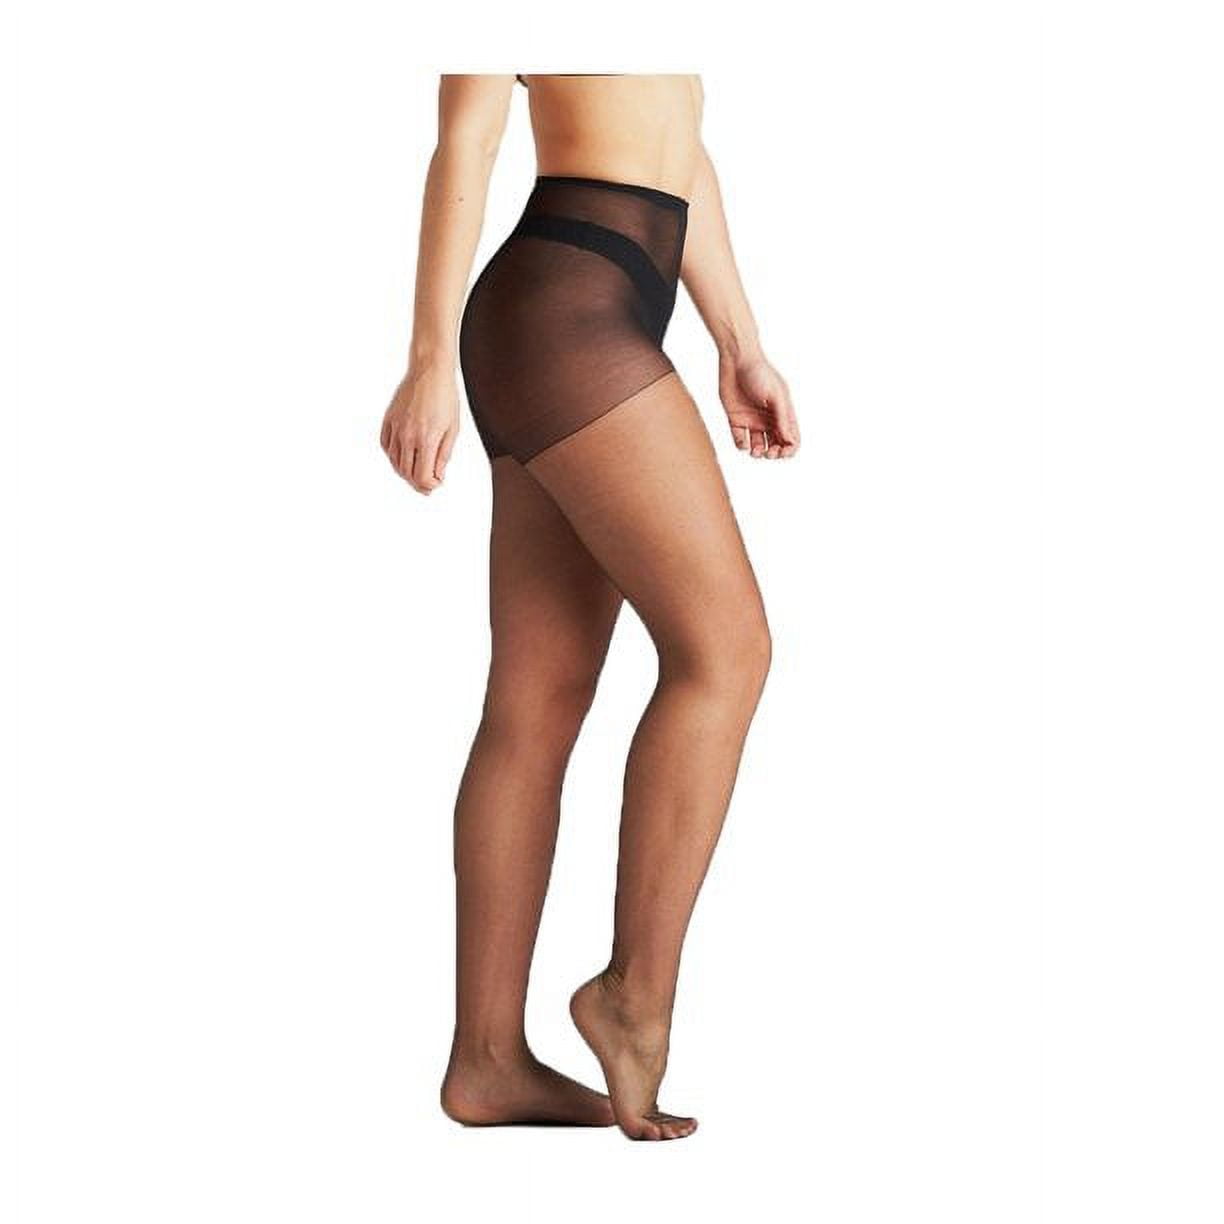 On the Go Women's Ultra Sheer Pantyhose, 1 Pack 